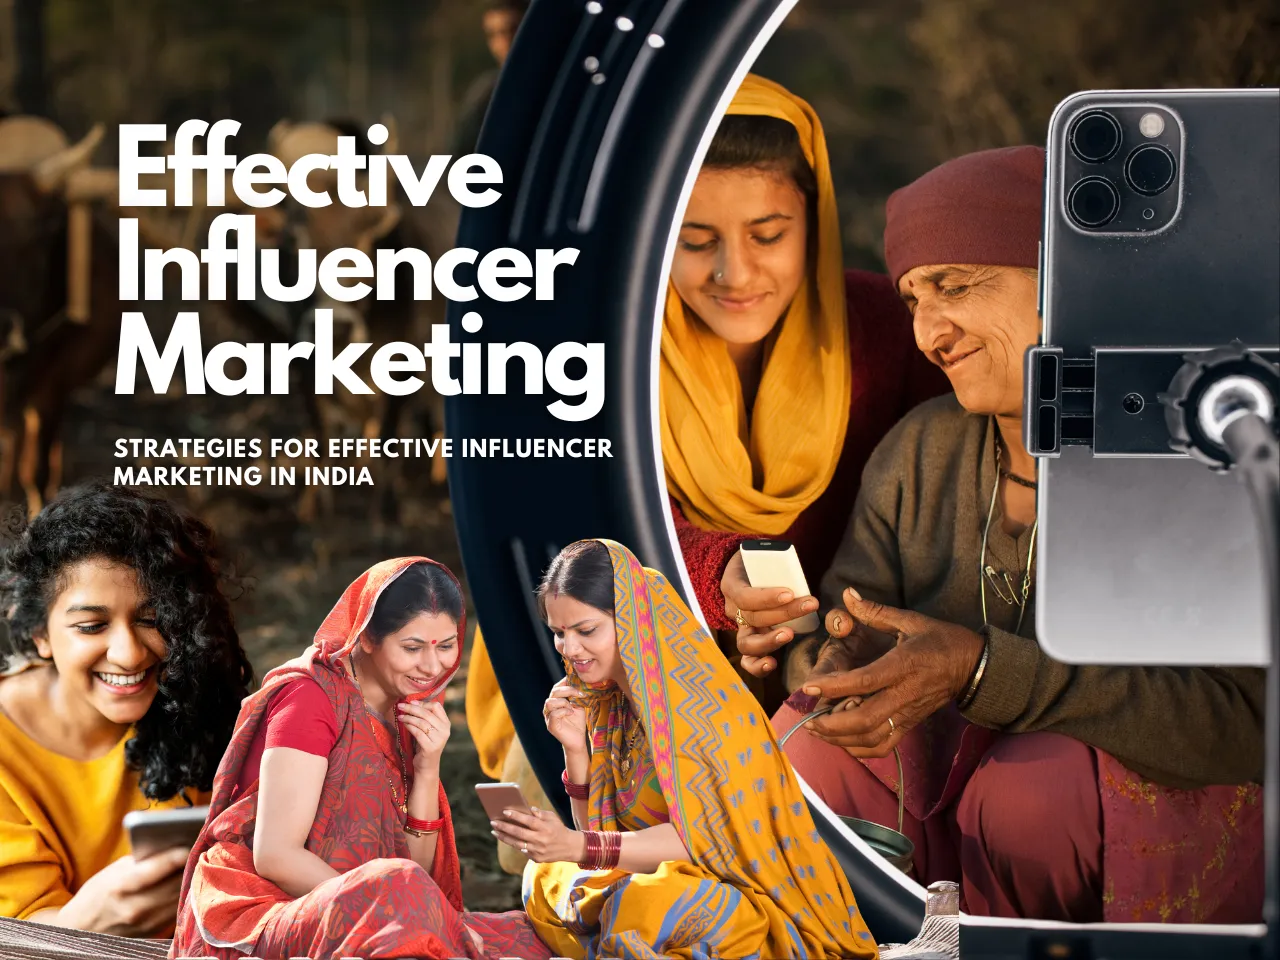 A Startup Entrepreneur's Guide to Effective Influencer Marketing